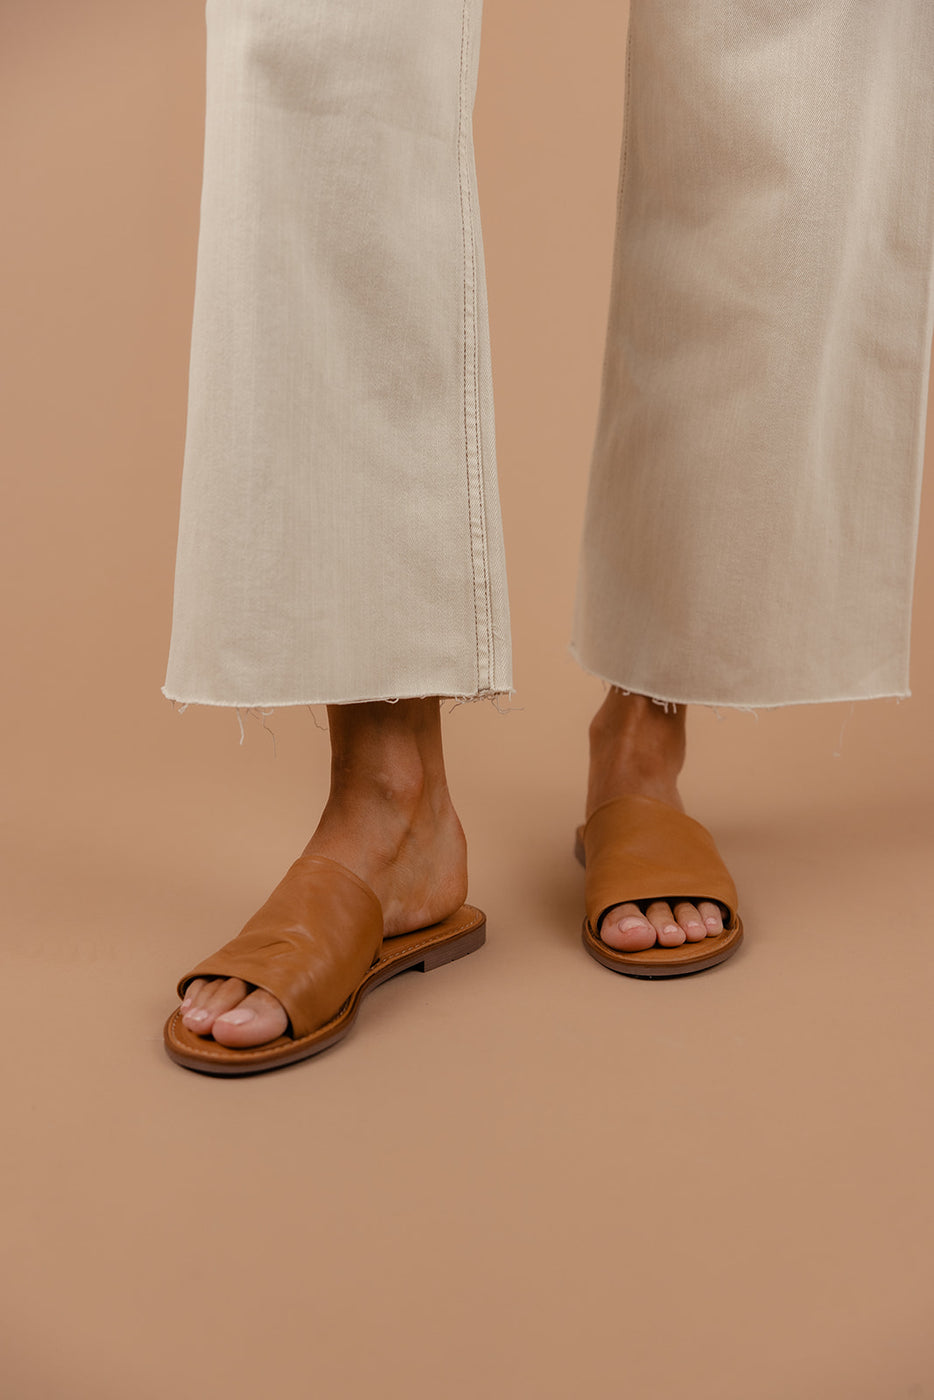 a person wearing sandals and pants